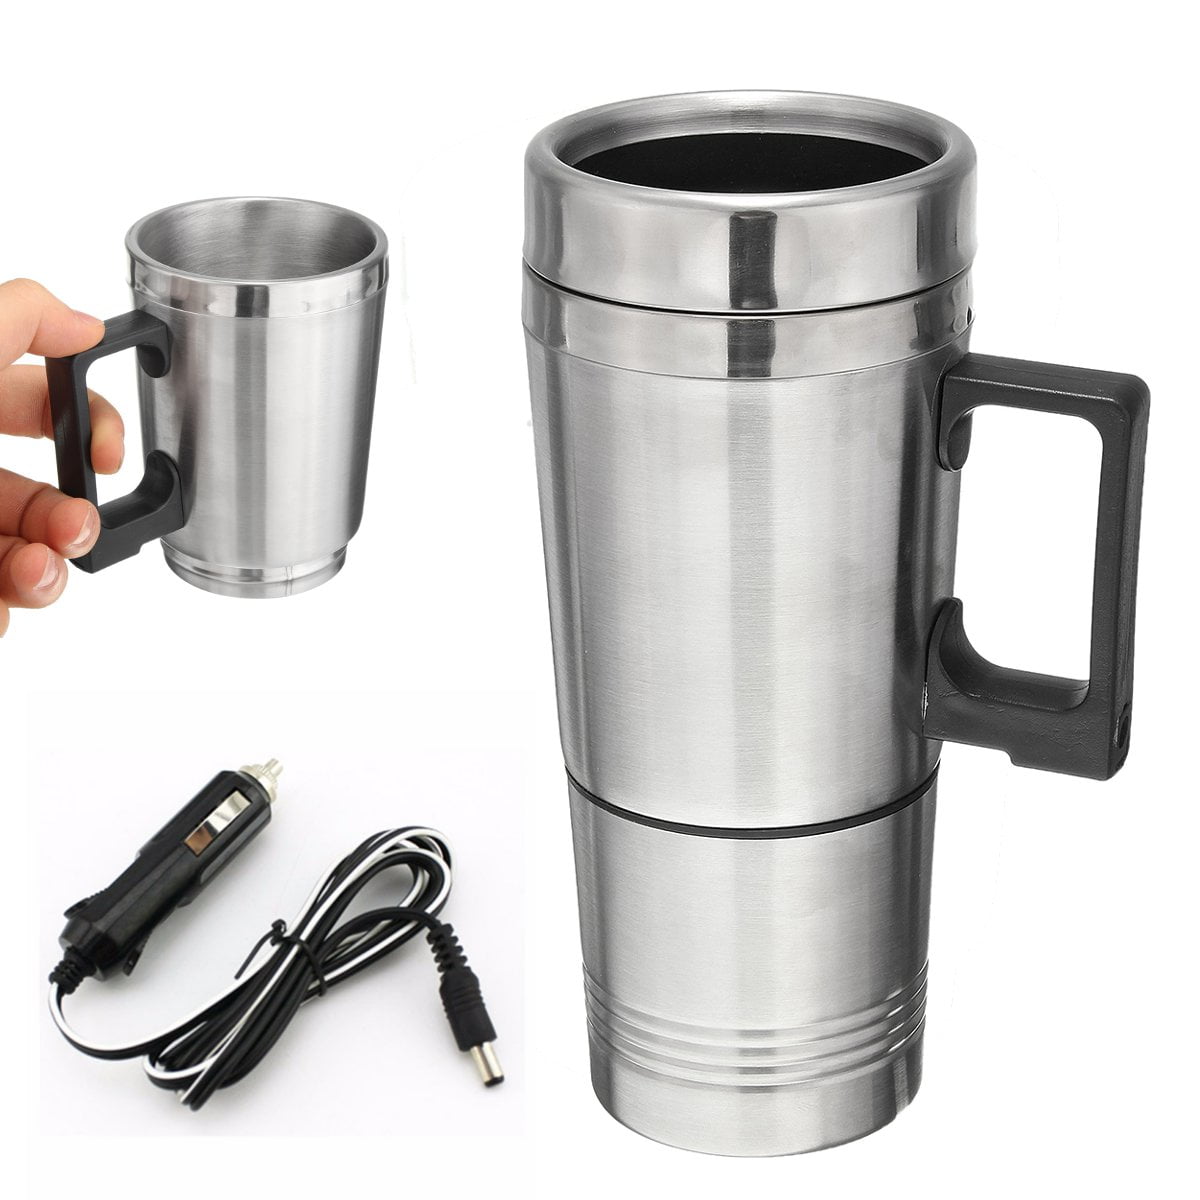 Portable 12V Car Electric Heated Hot Water Kettle Bottle Stainless Steel Cup 